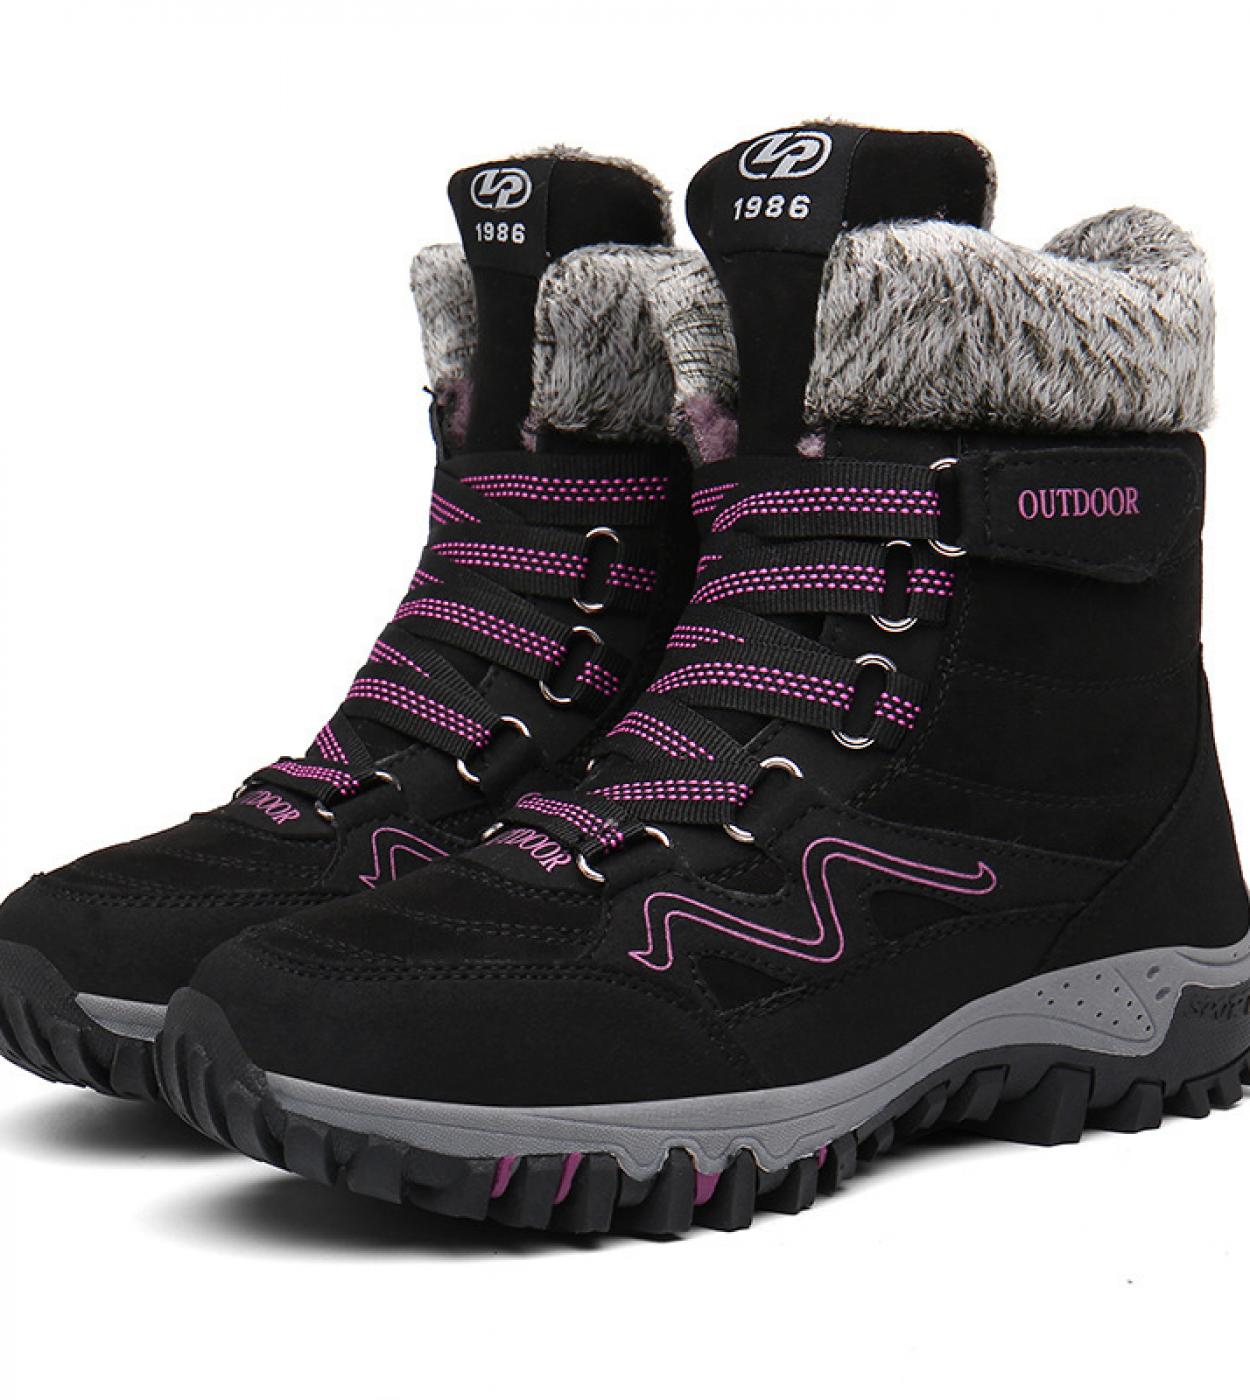 Winter Women Snow Boots For Women Men Warm High Boots Mid Calf Shoes Cold Weather Outdoor Plush Shoes Anti Skid Hiking B